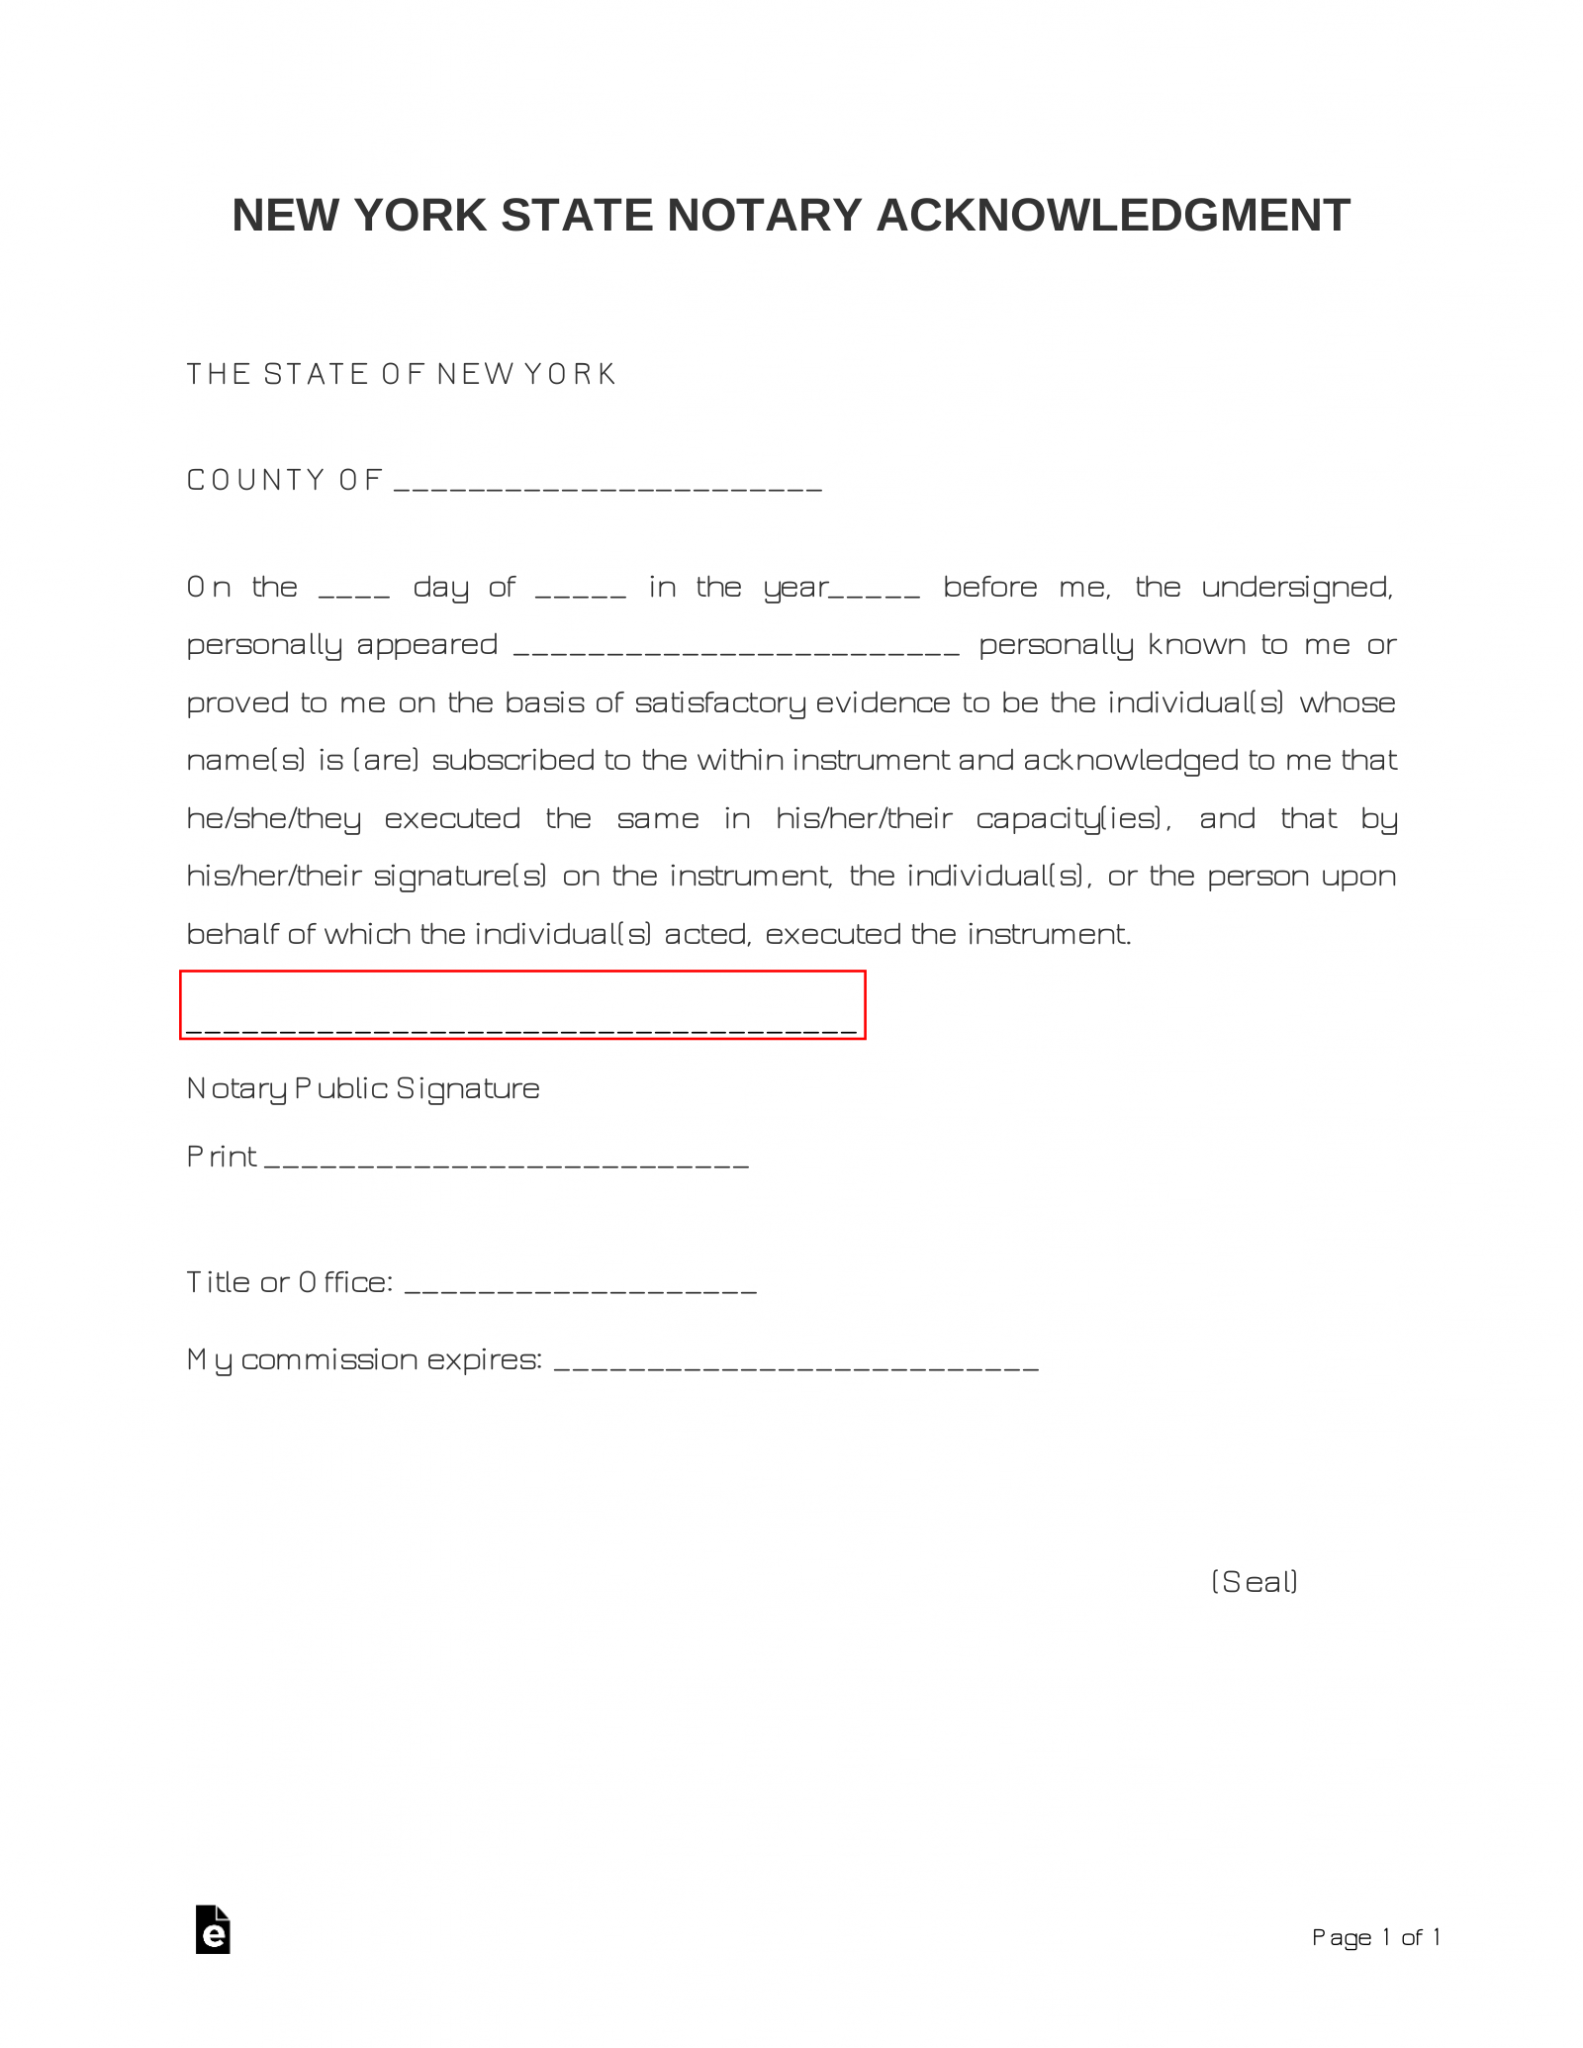 free-new-york-notary-acknowledgment-form-word-pdf-eforms